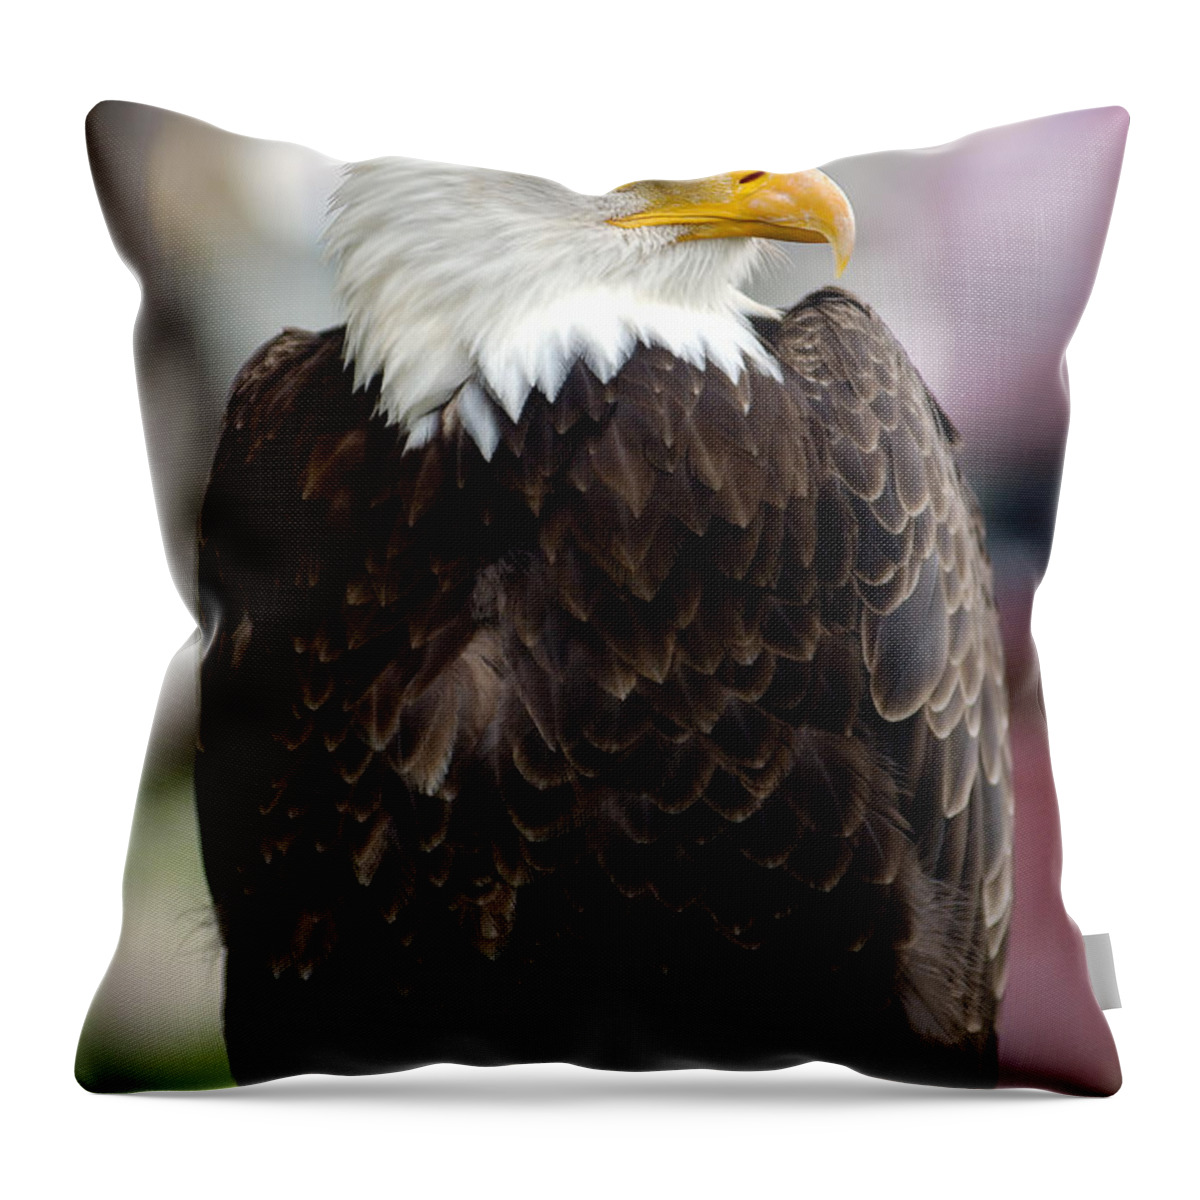 Eagle Throw Pillow featuring the photograph Eagle by Doug Gibbons